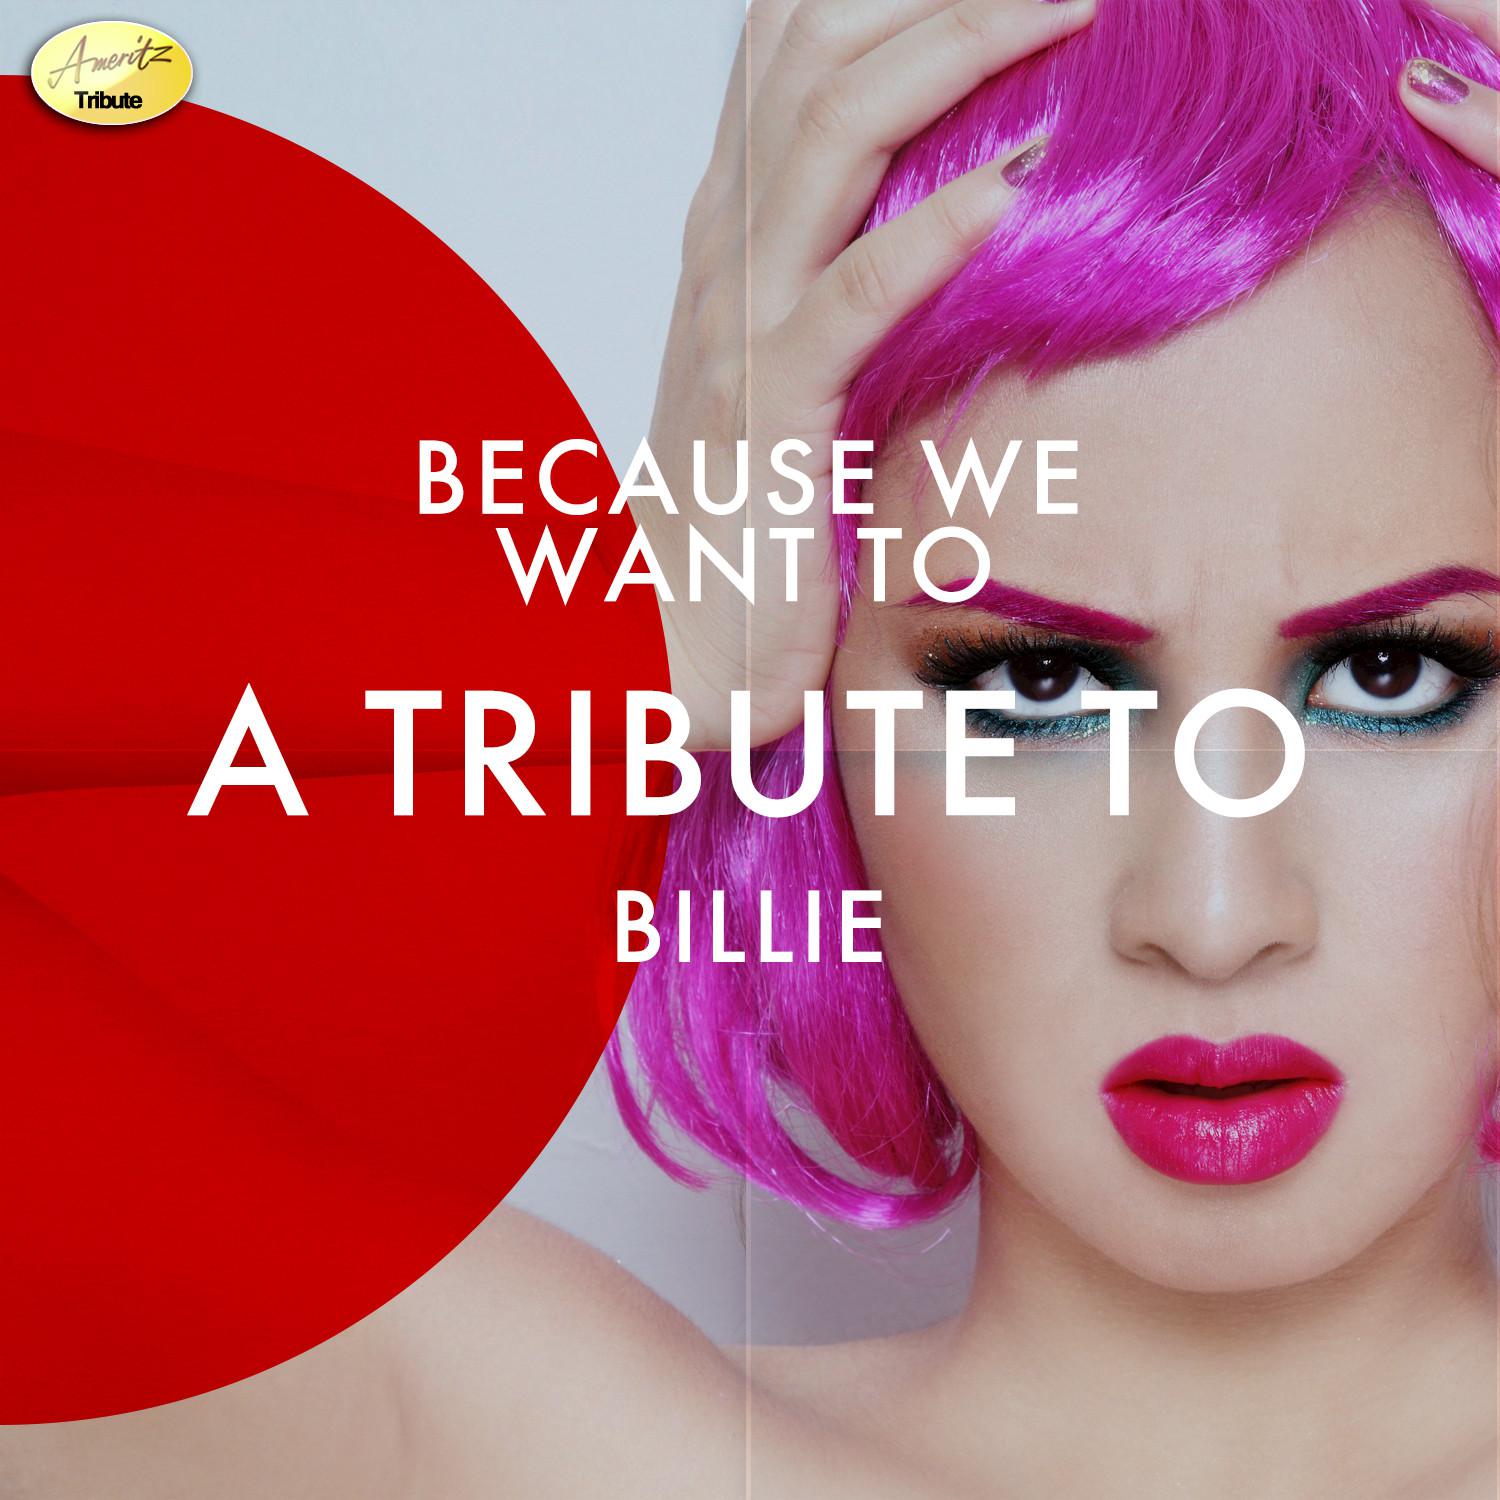 Because We Want to - A Tribute to Billie